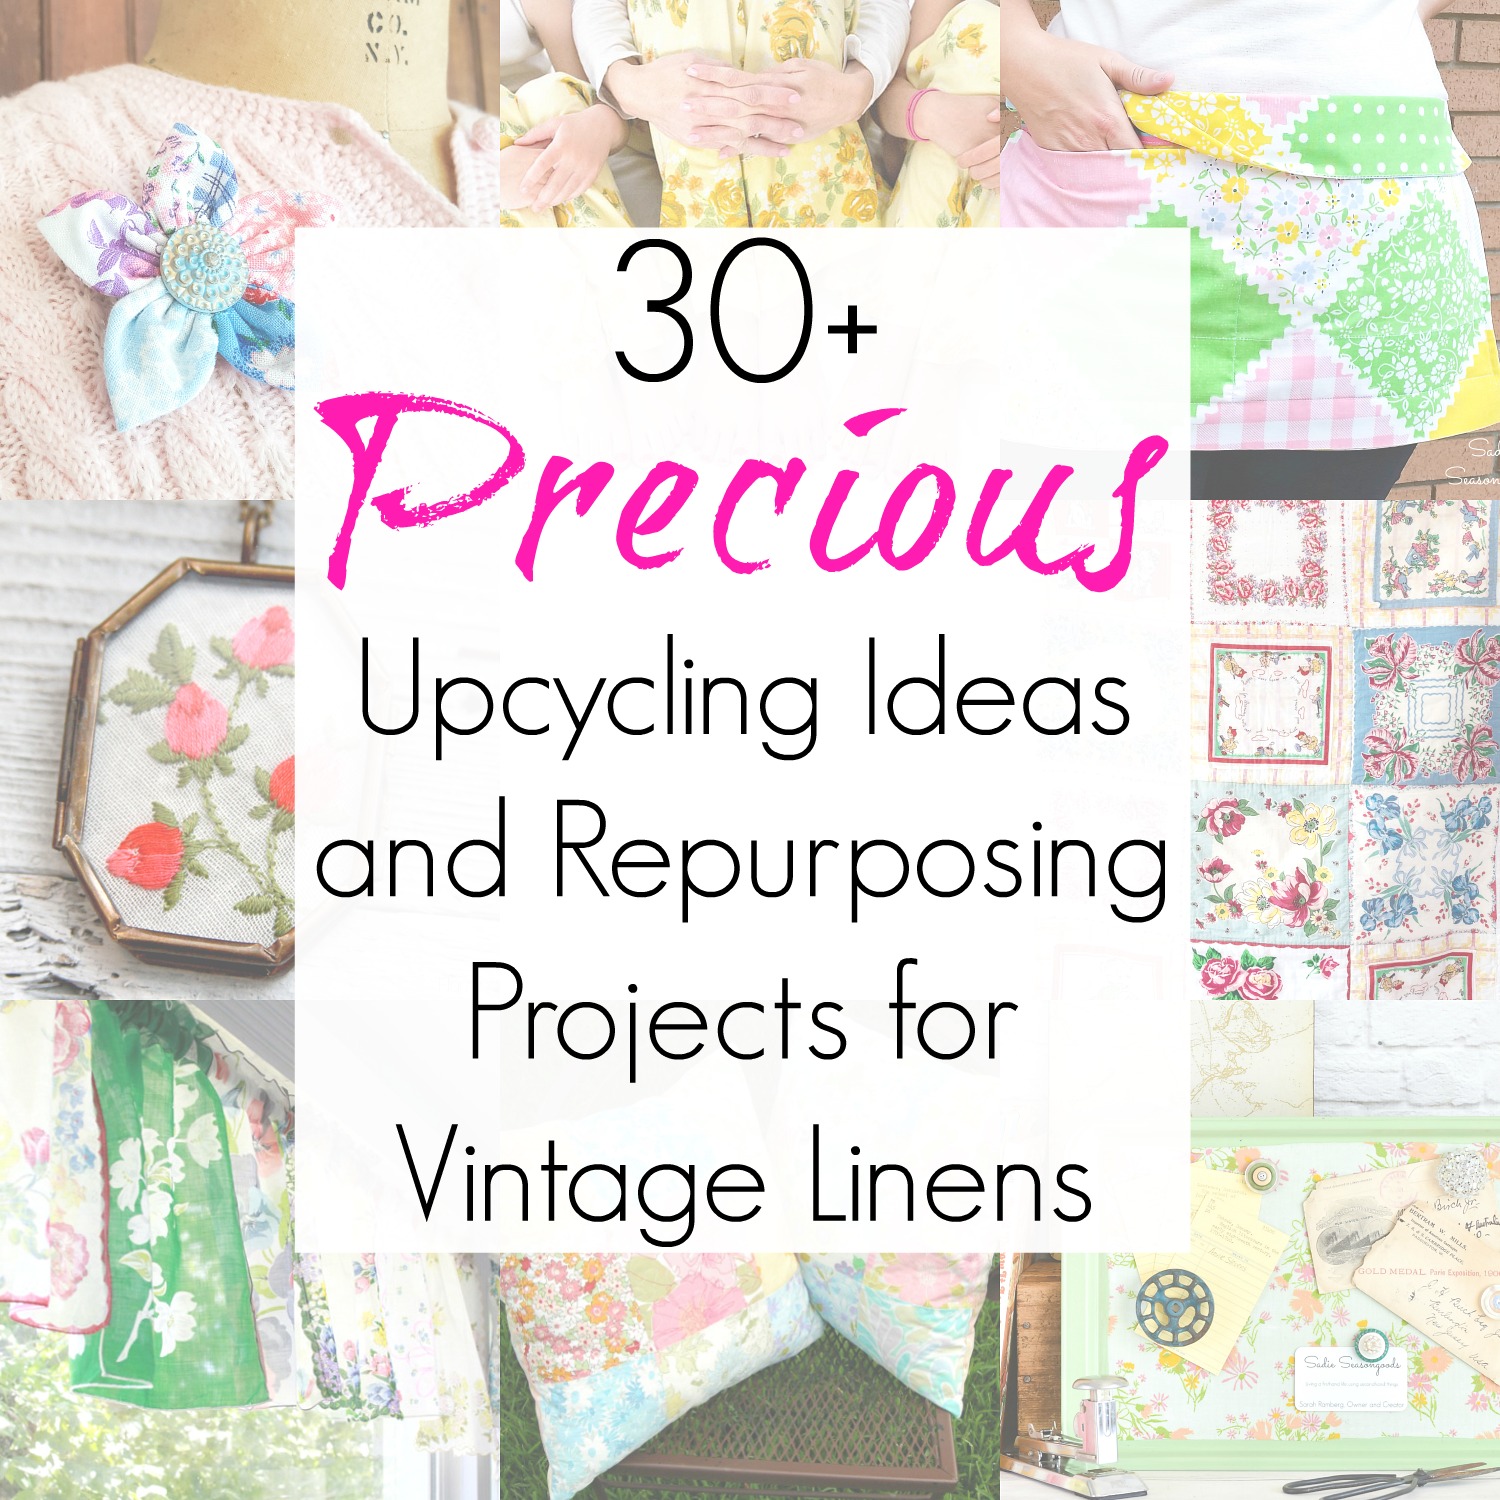 Upcycling projects for vintage linens and vintage tablecloths